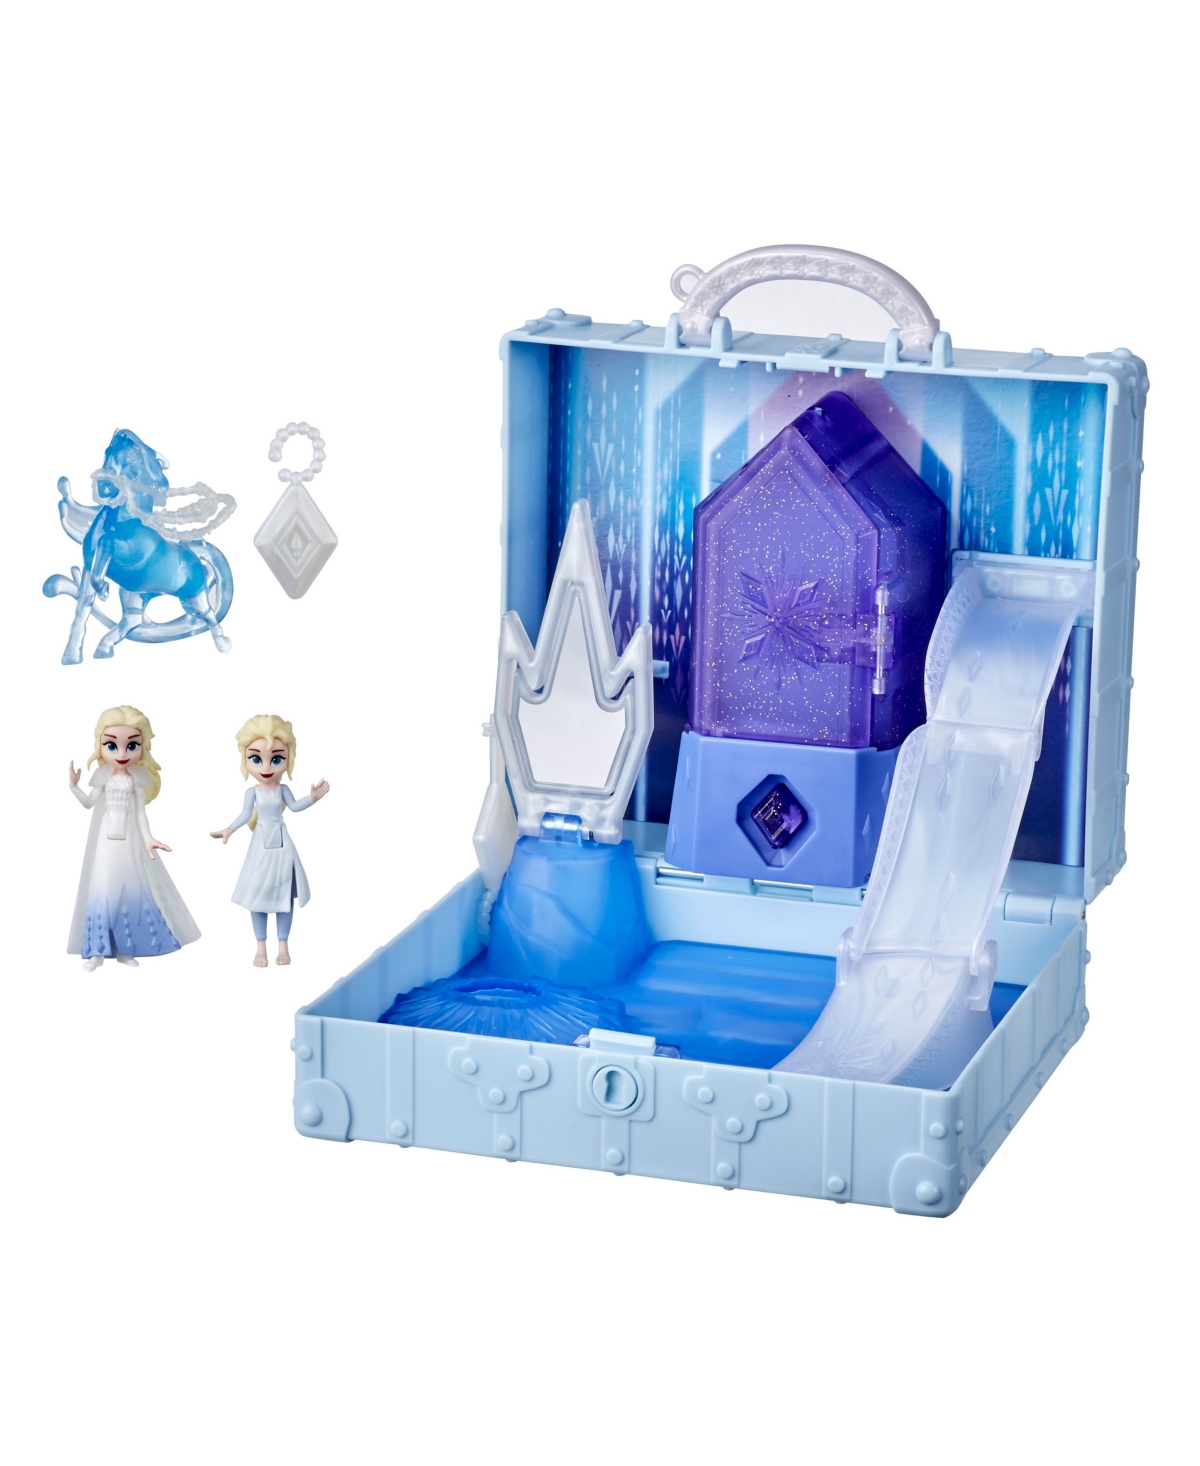 EAN 5010993742110 product image for Frozen 2 Ahtohallan Adventures Playset | upcitemdb.com